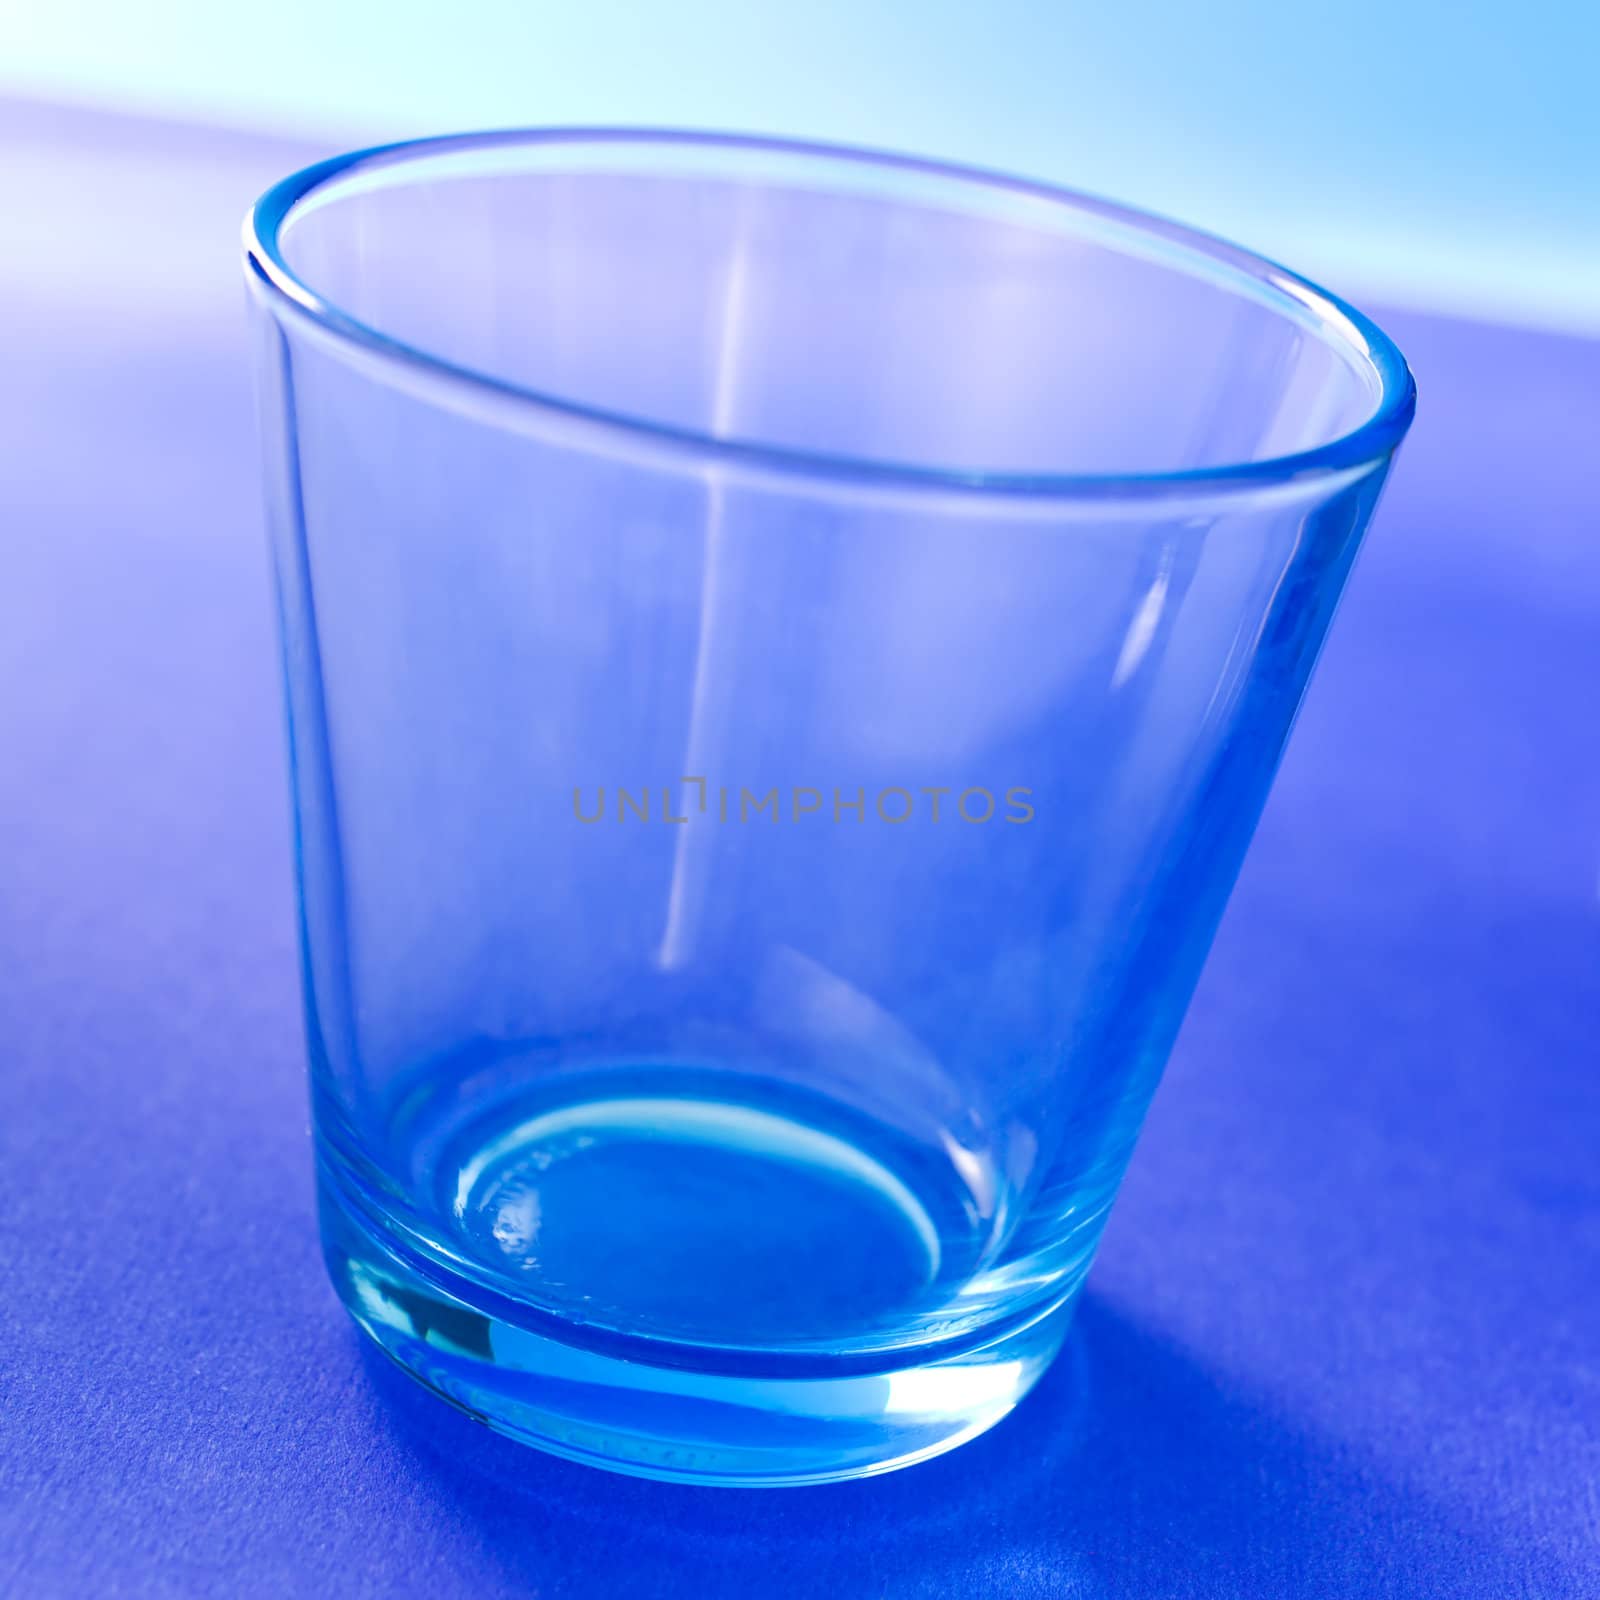 Empty light blue glass on the table